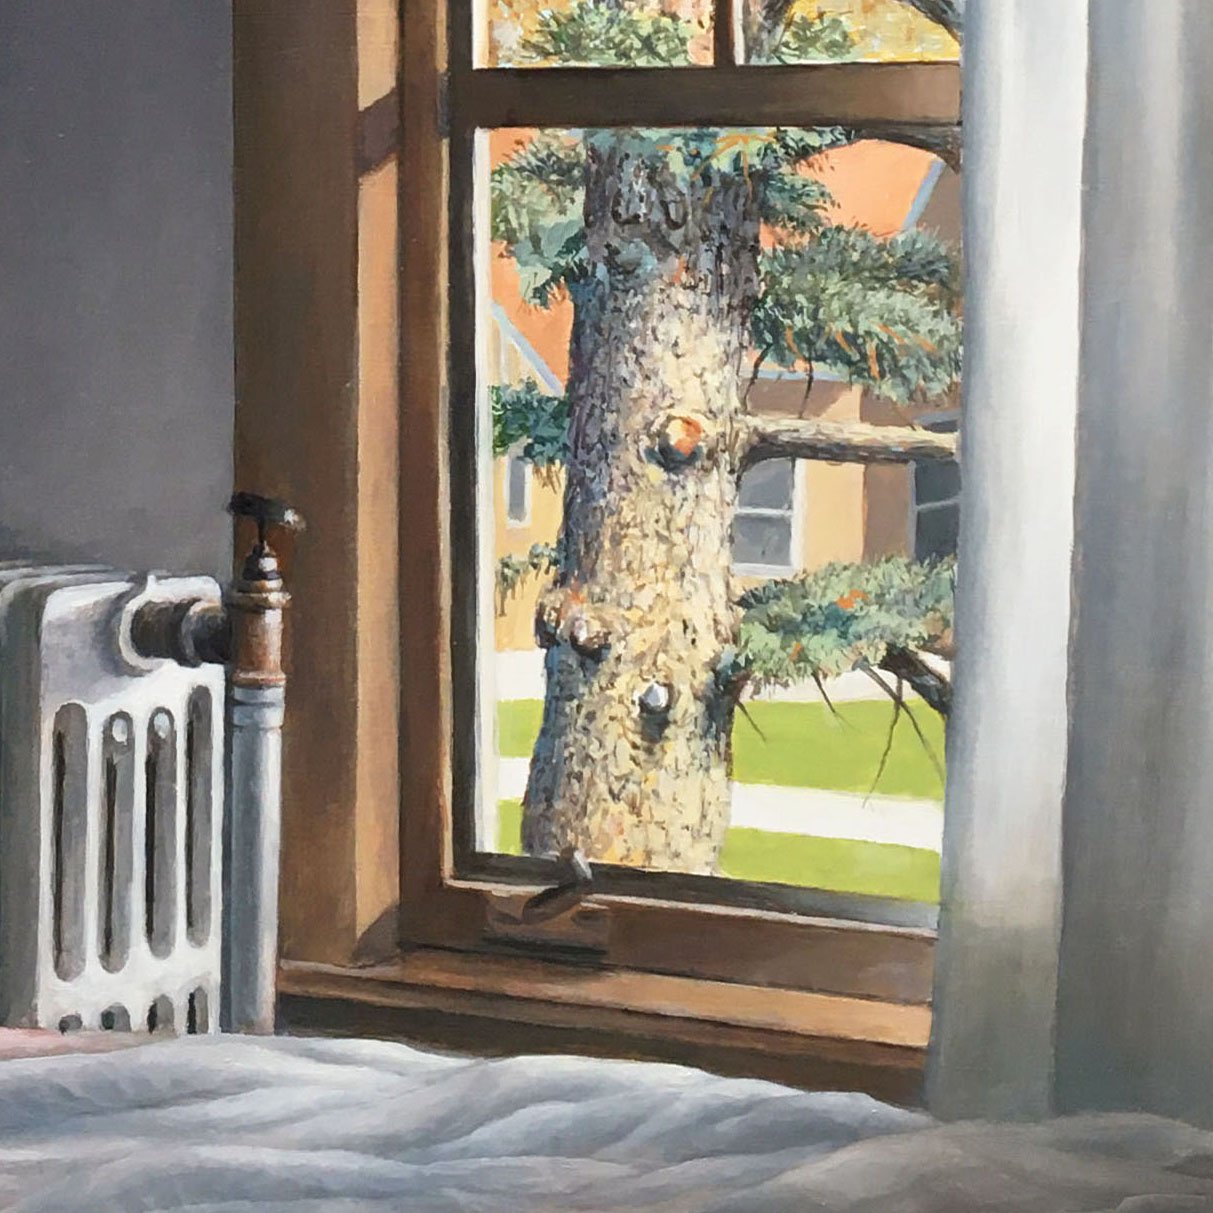  (Detail)  Pine Tree Window   2022  Oil on panel  16 x 16 inches   